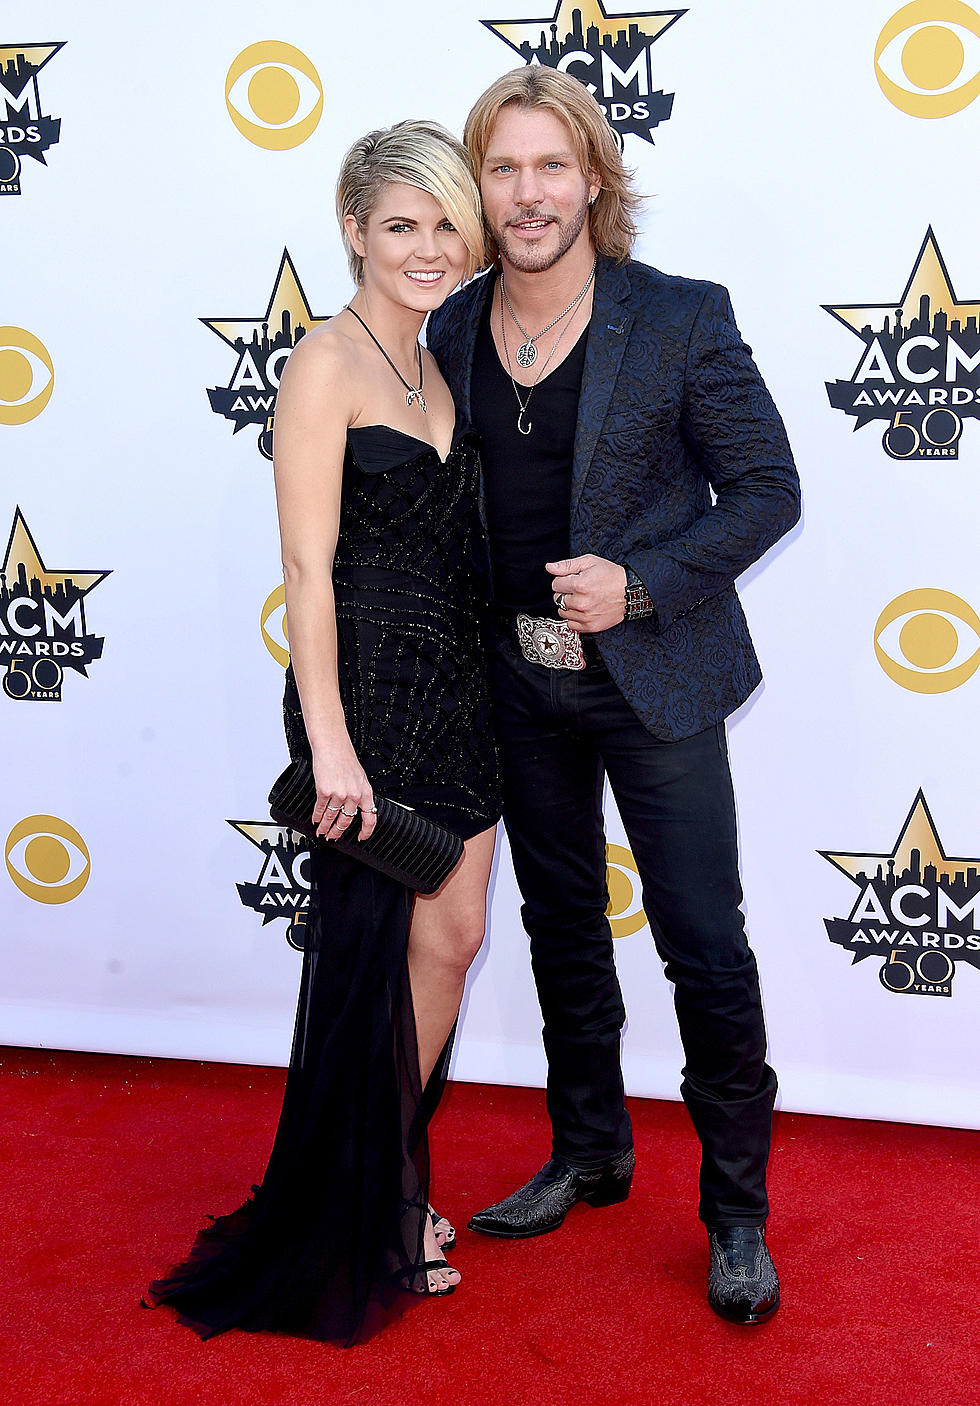 ‘The Voice’ Champ Craig Wayne Boyd to Play Our Auction for Honor Flight [VIDEO]